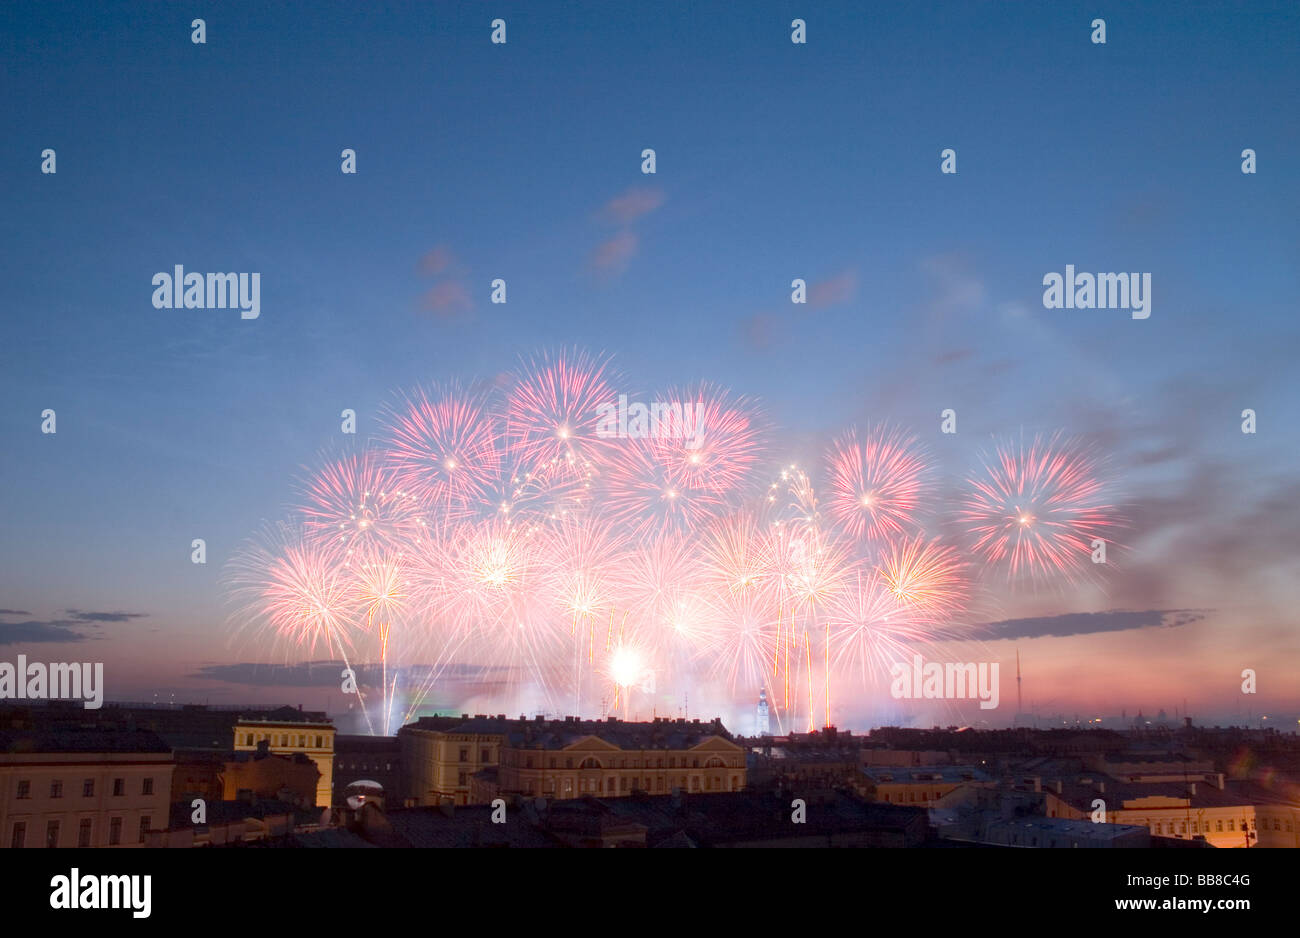 Fireworks, white nights in Saint Petersburg, sunset and rise above the city, Saint Petersburg, Russia Stock Photo